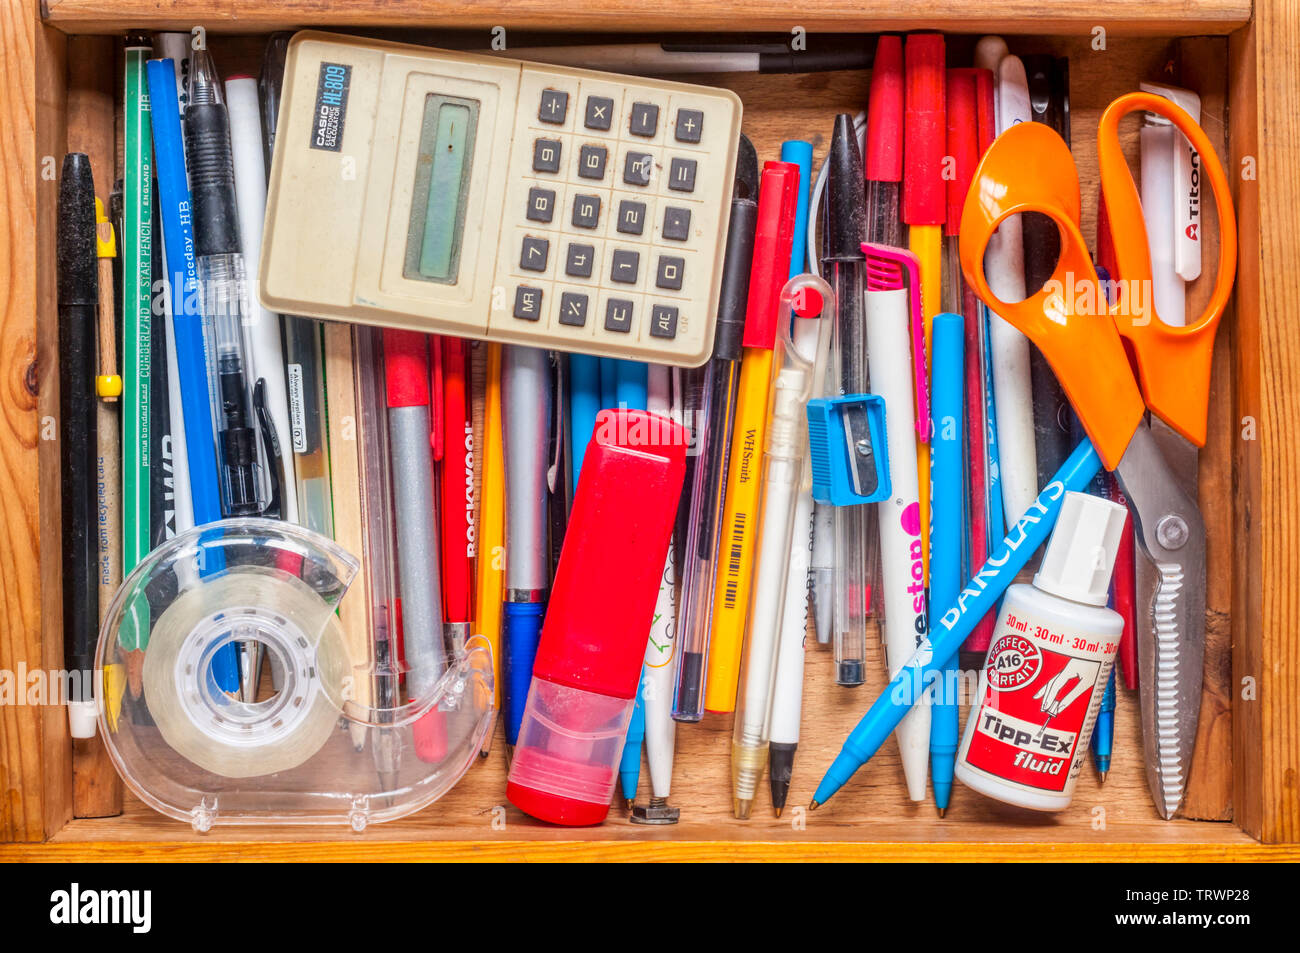 Stationery items stored in a drawer - pens, pencils and office equipment. Stock Photo